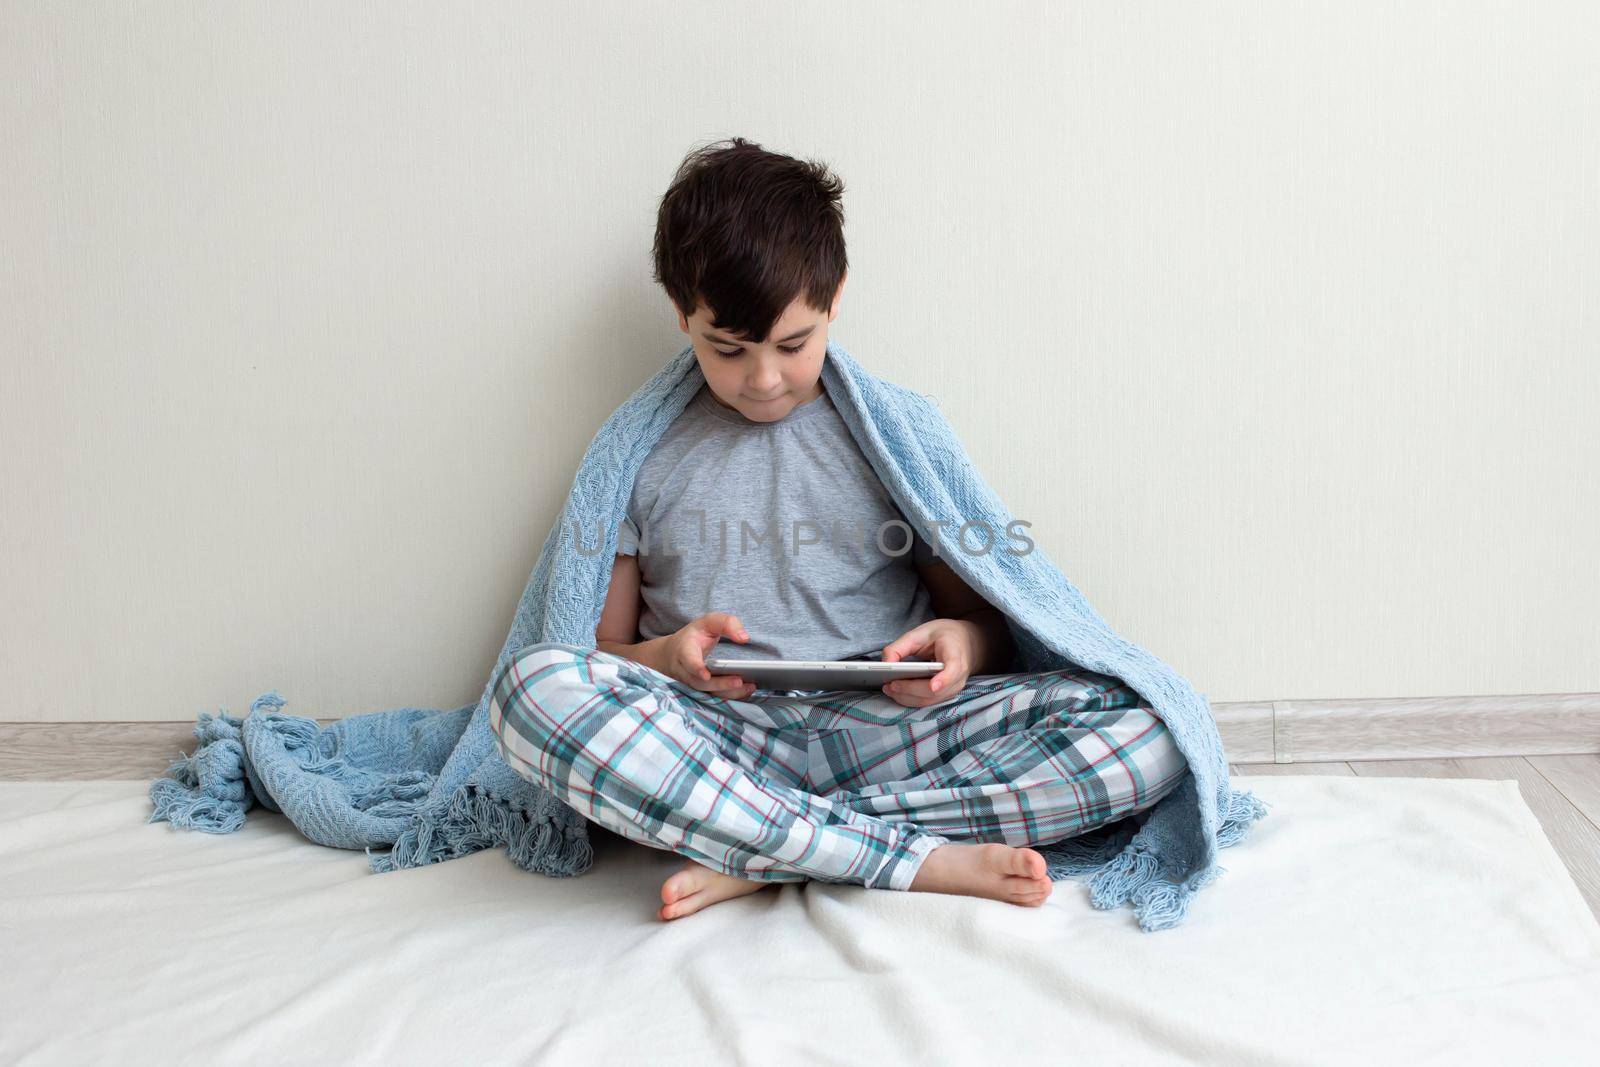 A brunette boy in gray pajamas, in a blue knitted plaid sits against a light wall, on the floor, uses a digital tablet. Copy space